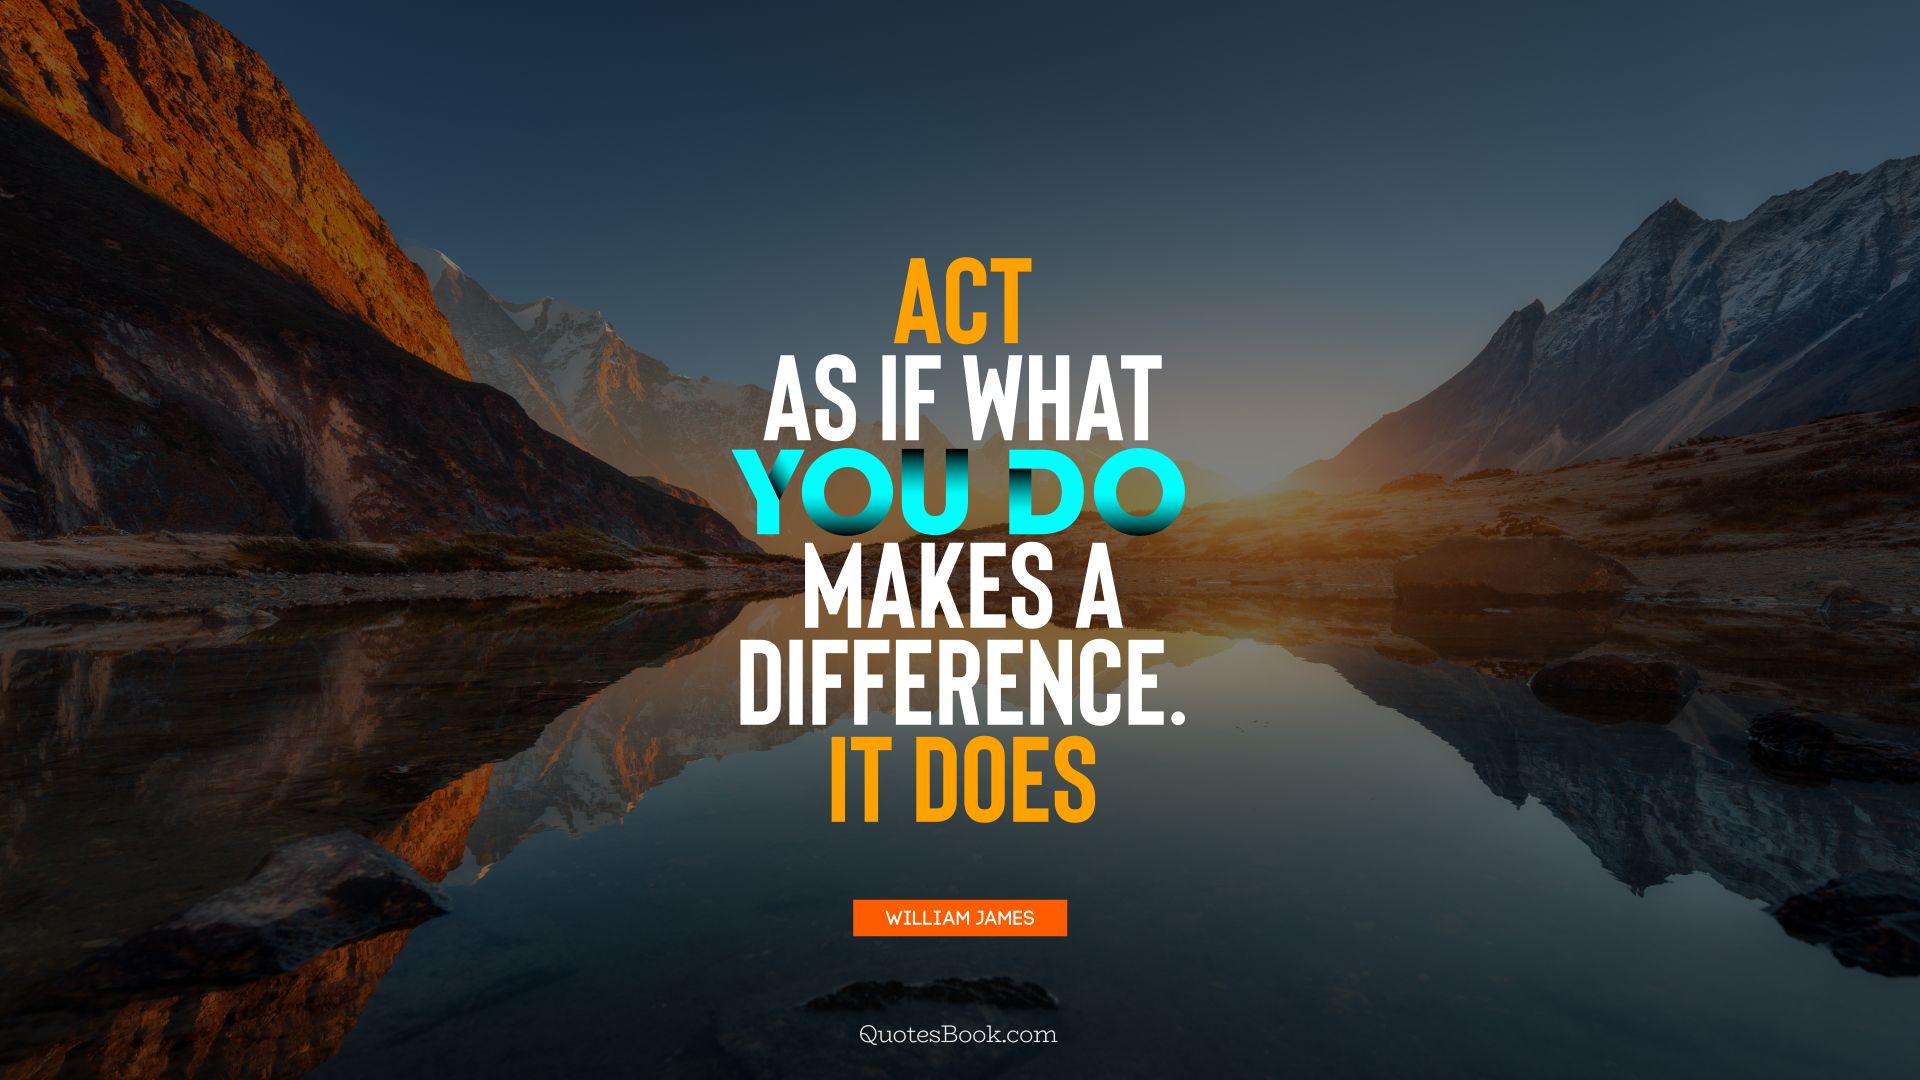 Act as if what you do makes a difference. It does. - Quote by William James